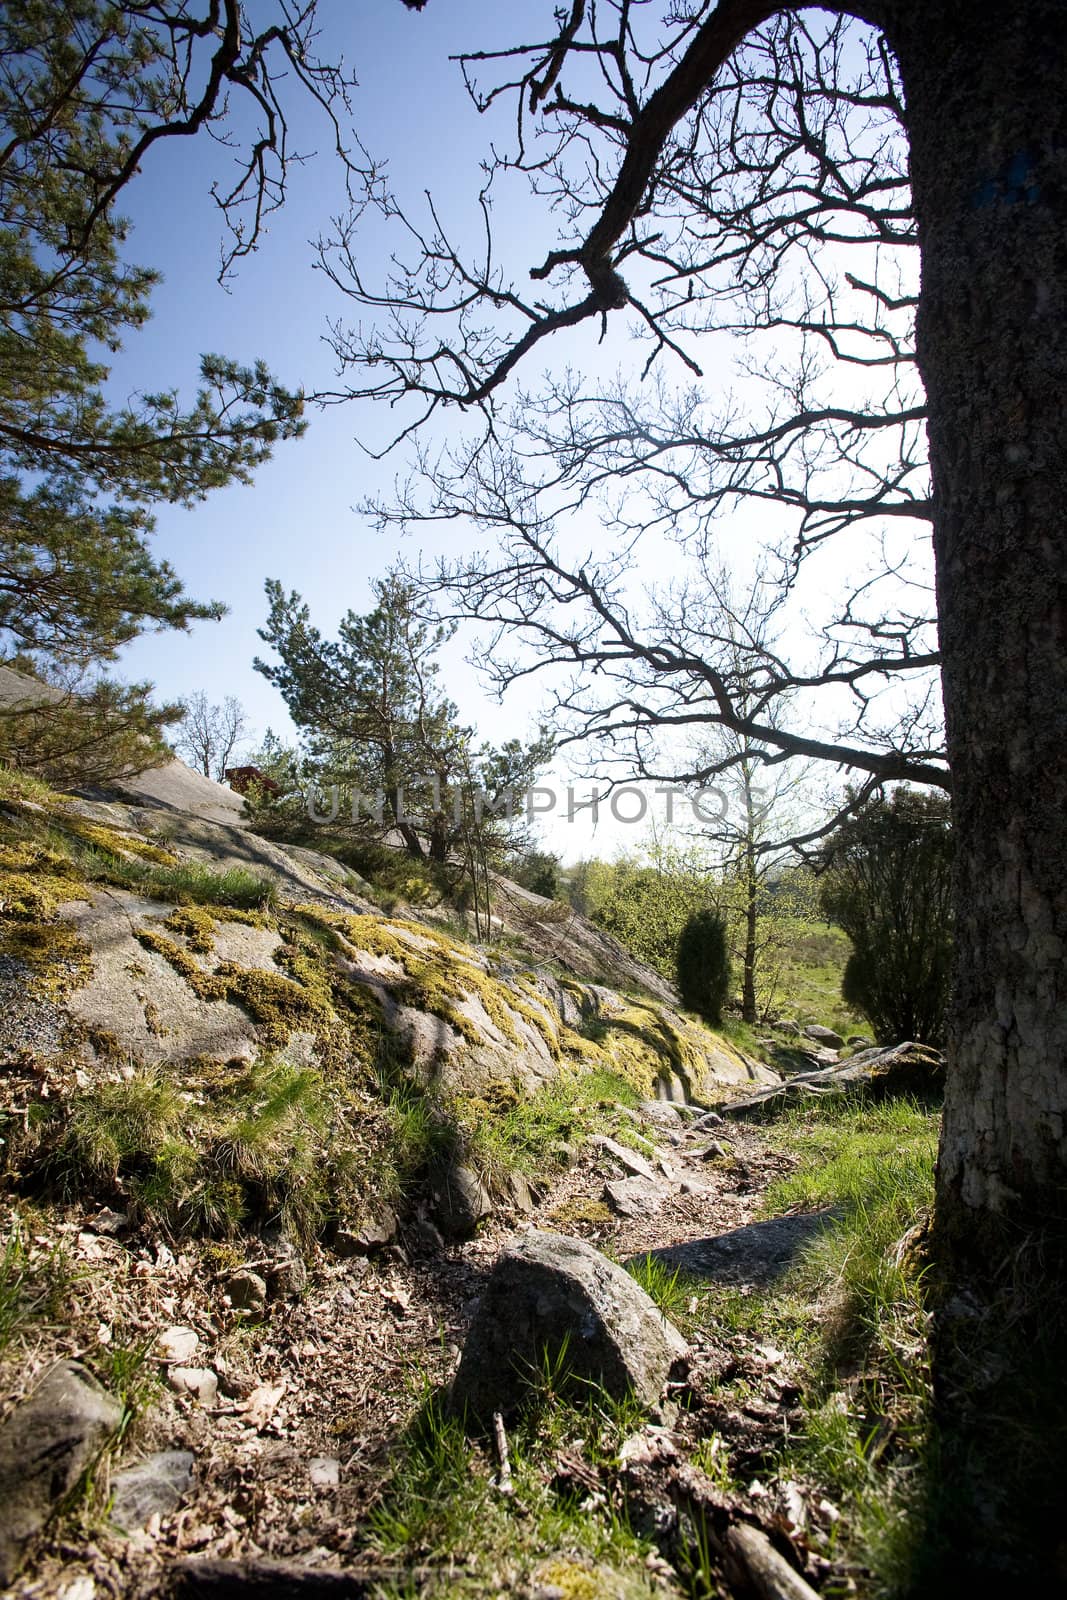 A norwegian landscape with rocks and small trees